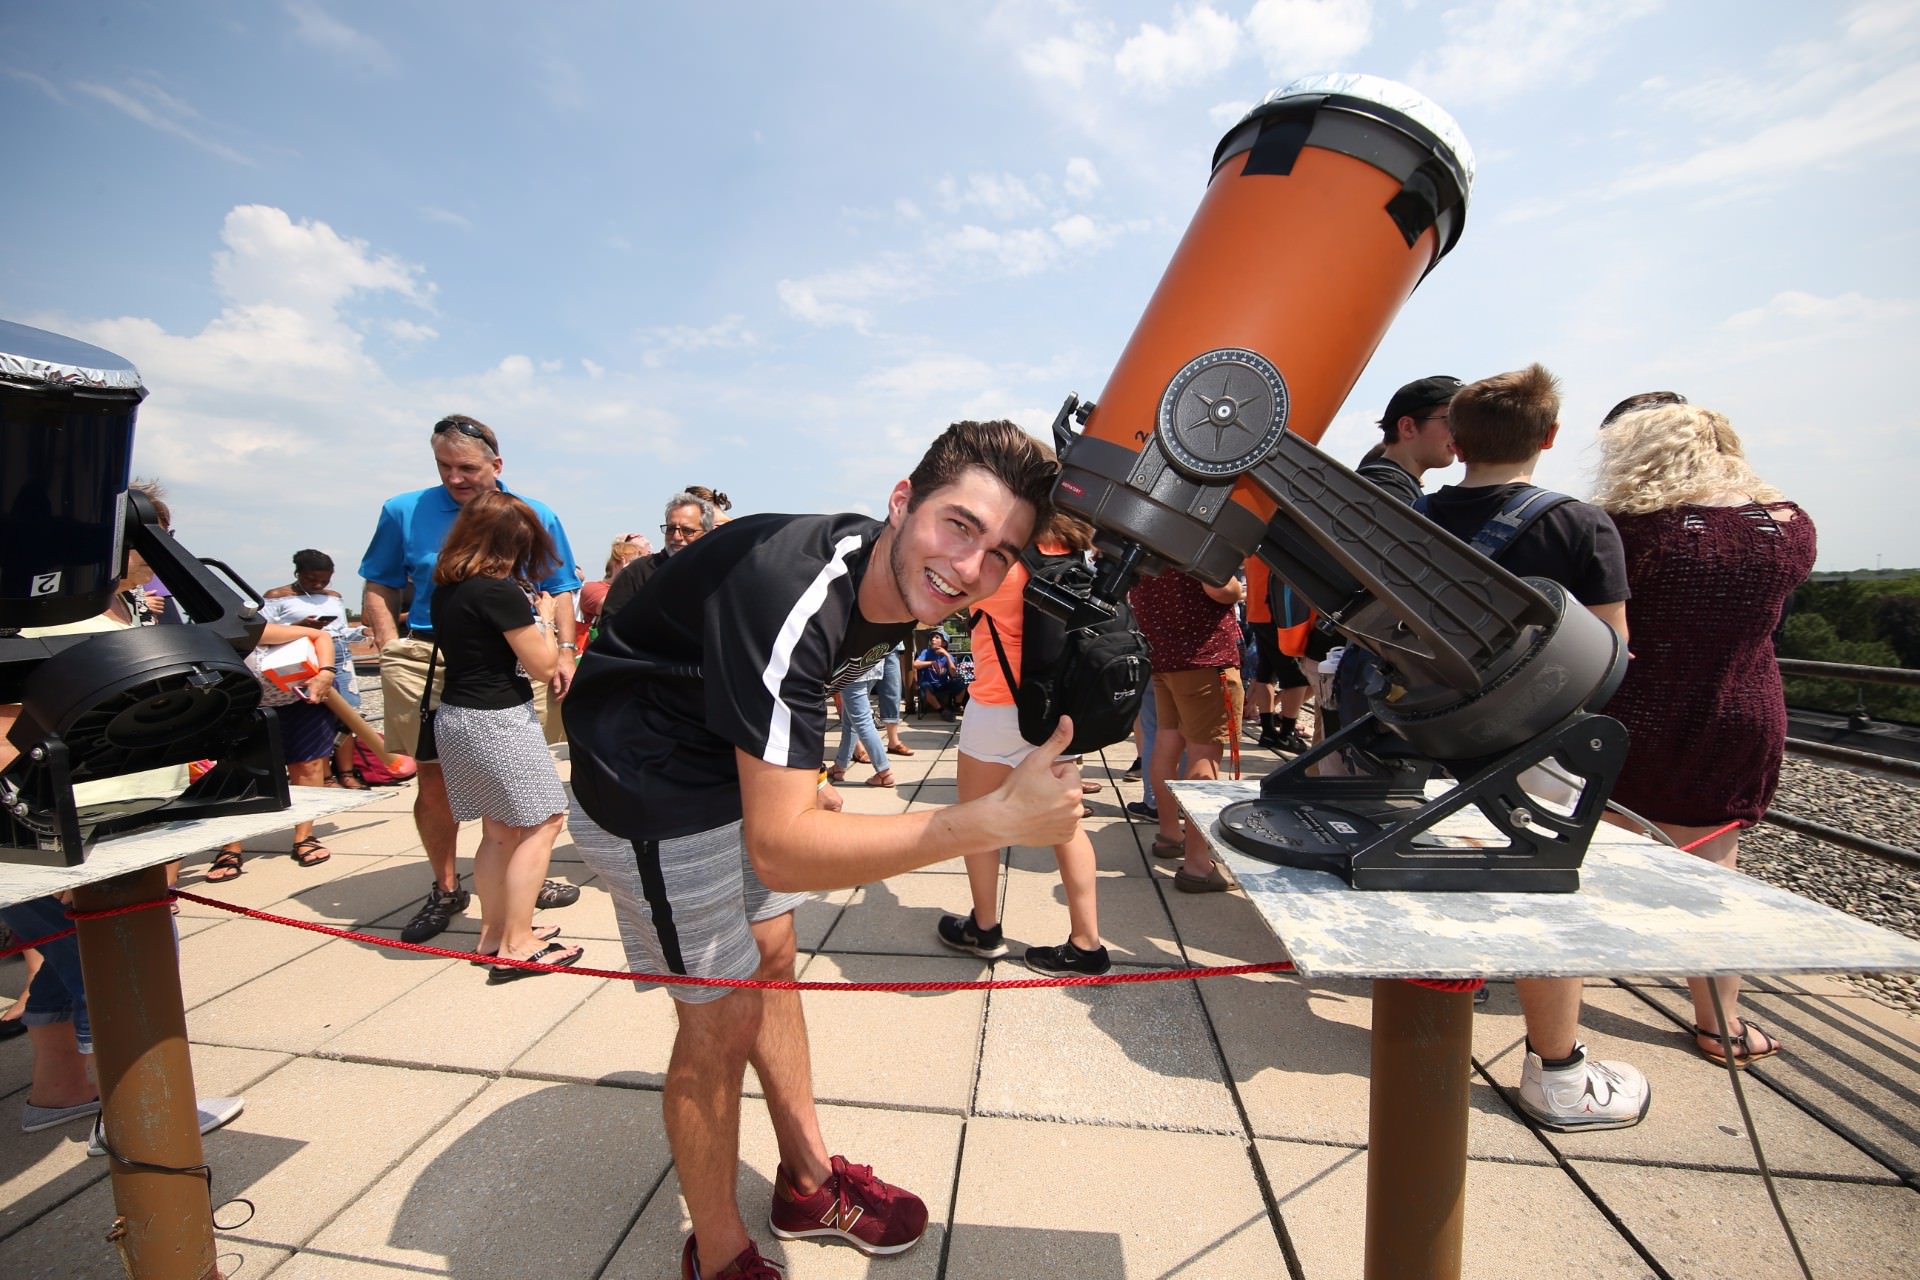  guy smiling at camera next to telescope